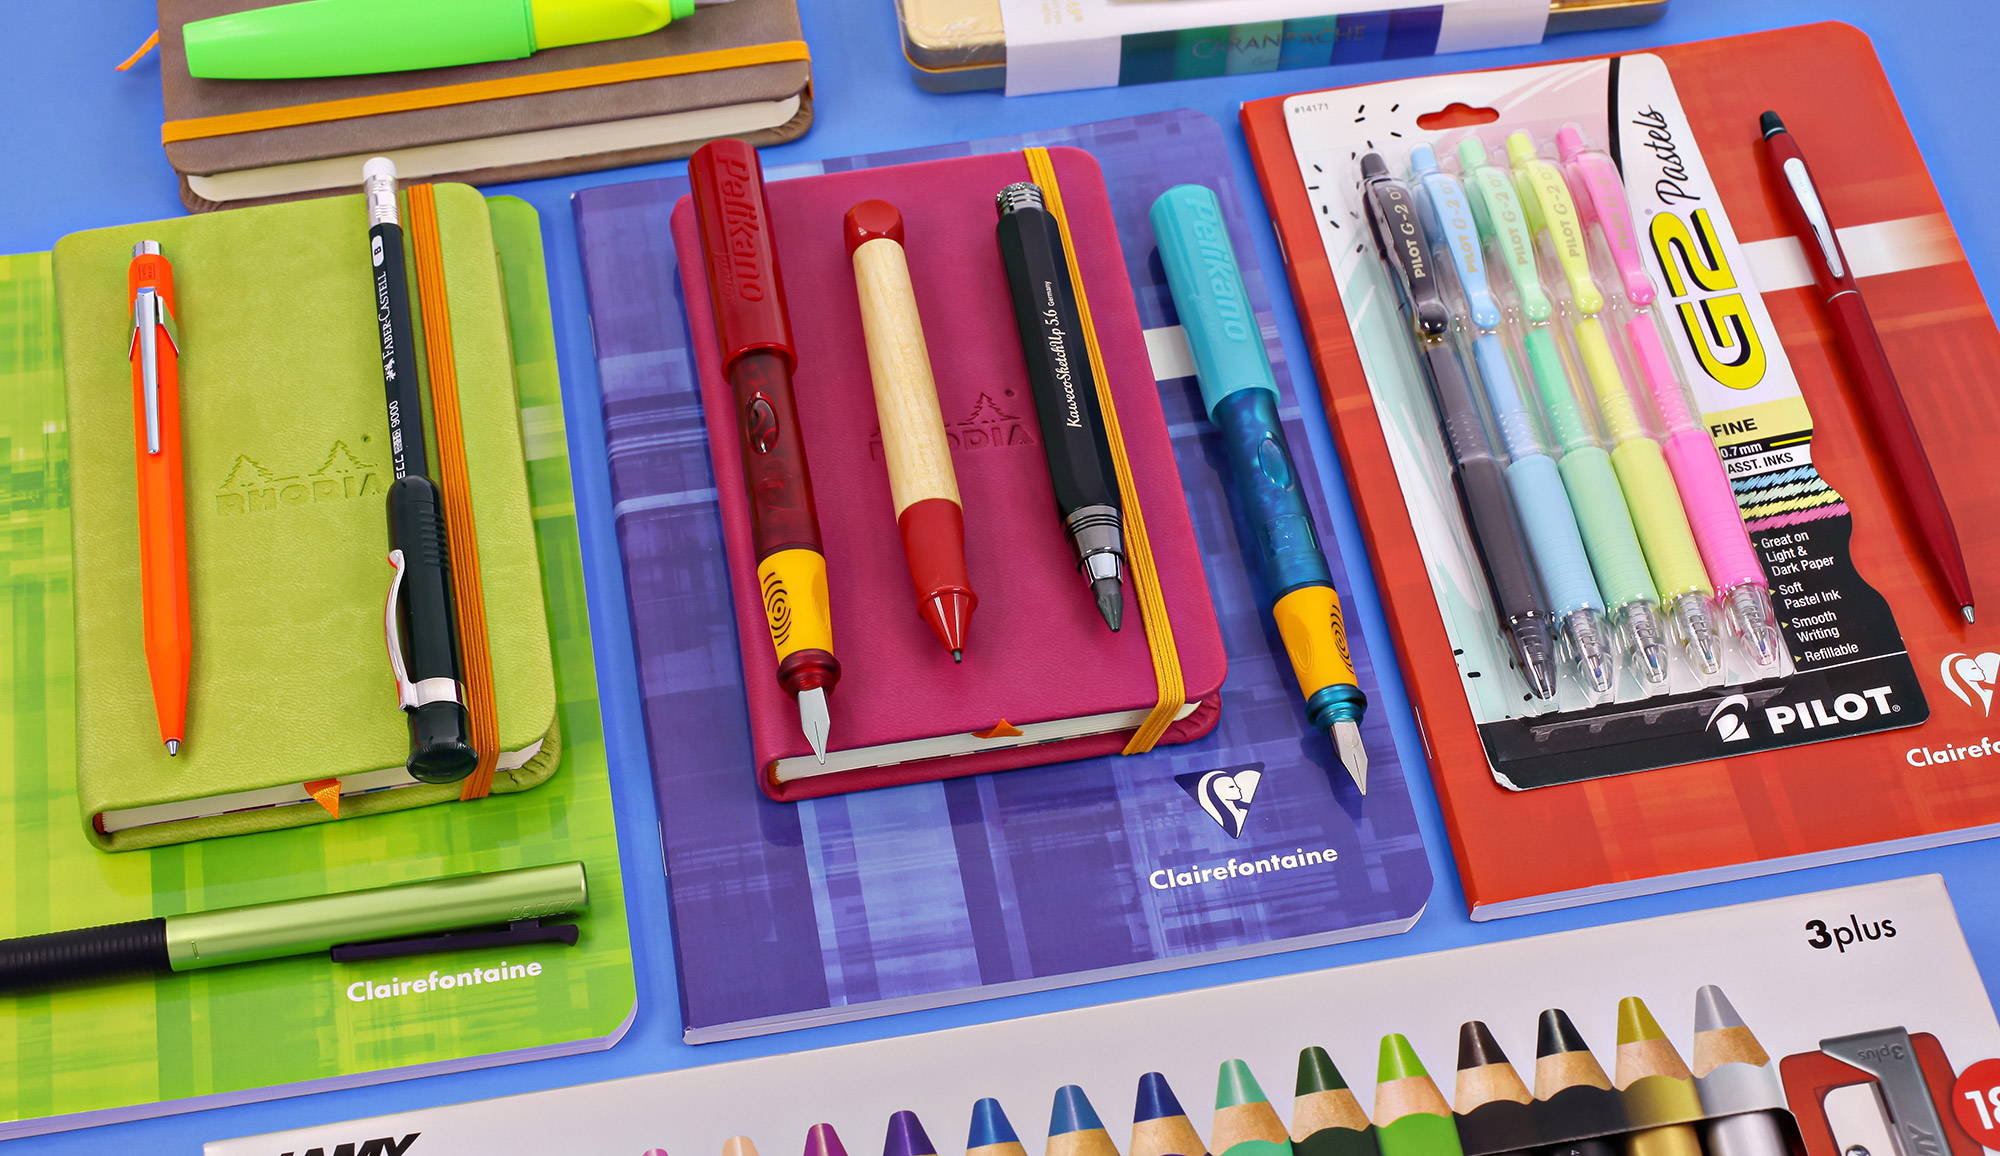 All of our favorite pens laid out over notebooks